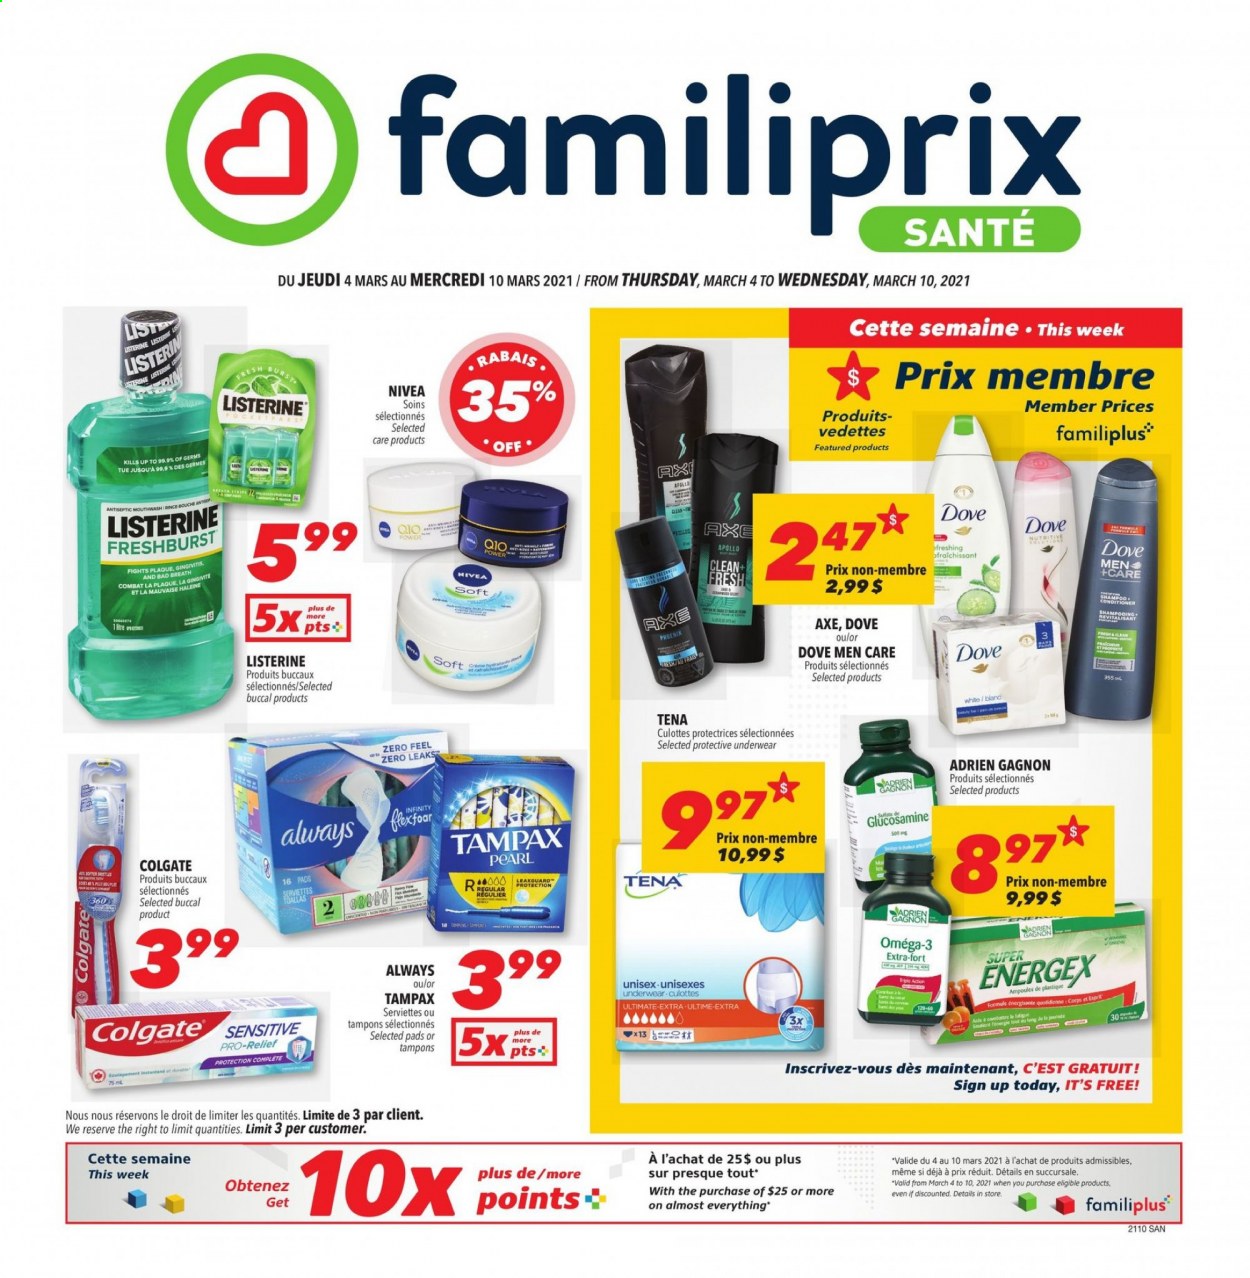 thumbnail - Familiprix Santé Flyer - March 04, 2021 - March 10, 2021 - Sales products - Mars, tampons, Infinity, conditioner, glucosamine, Omega-3, Listerine, shampoo, Tampax, Nivea. Page 1.